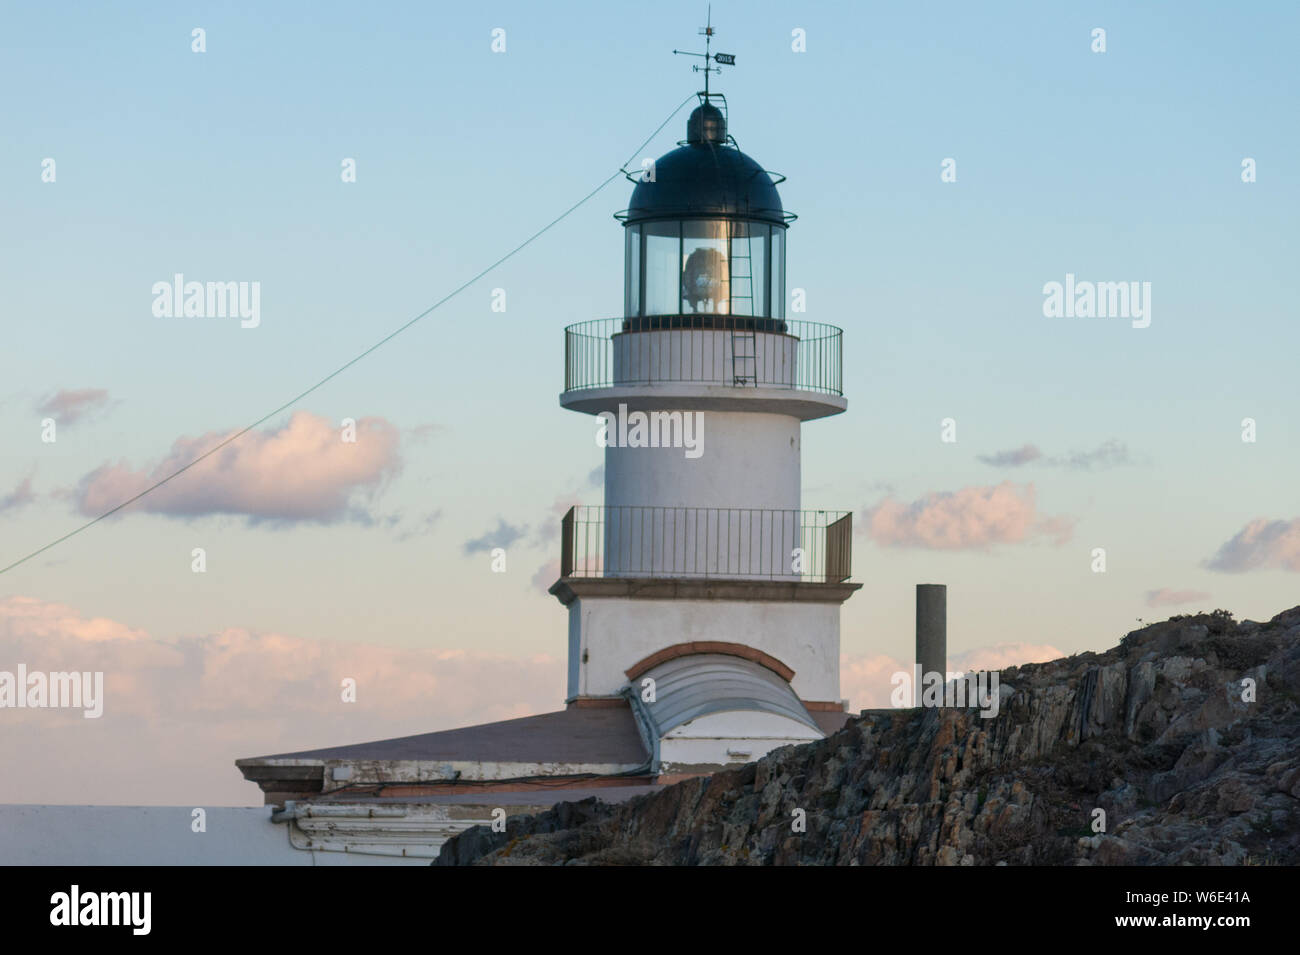 Lighthouse of the Cap de Creus Natural Park, the westernmost point of Spain, where the sun first rises. Cadaques, Catalonia, Spain. Stock Photo